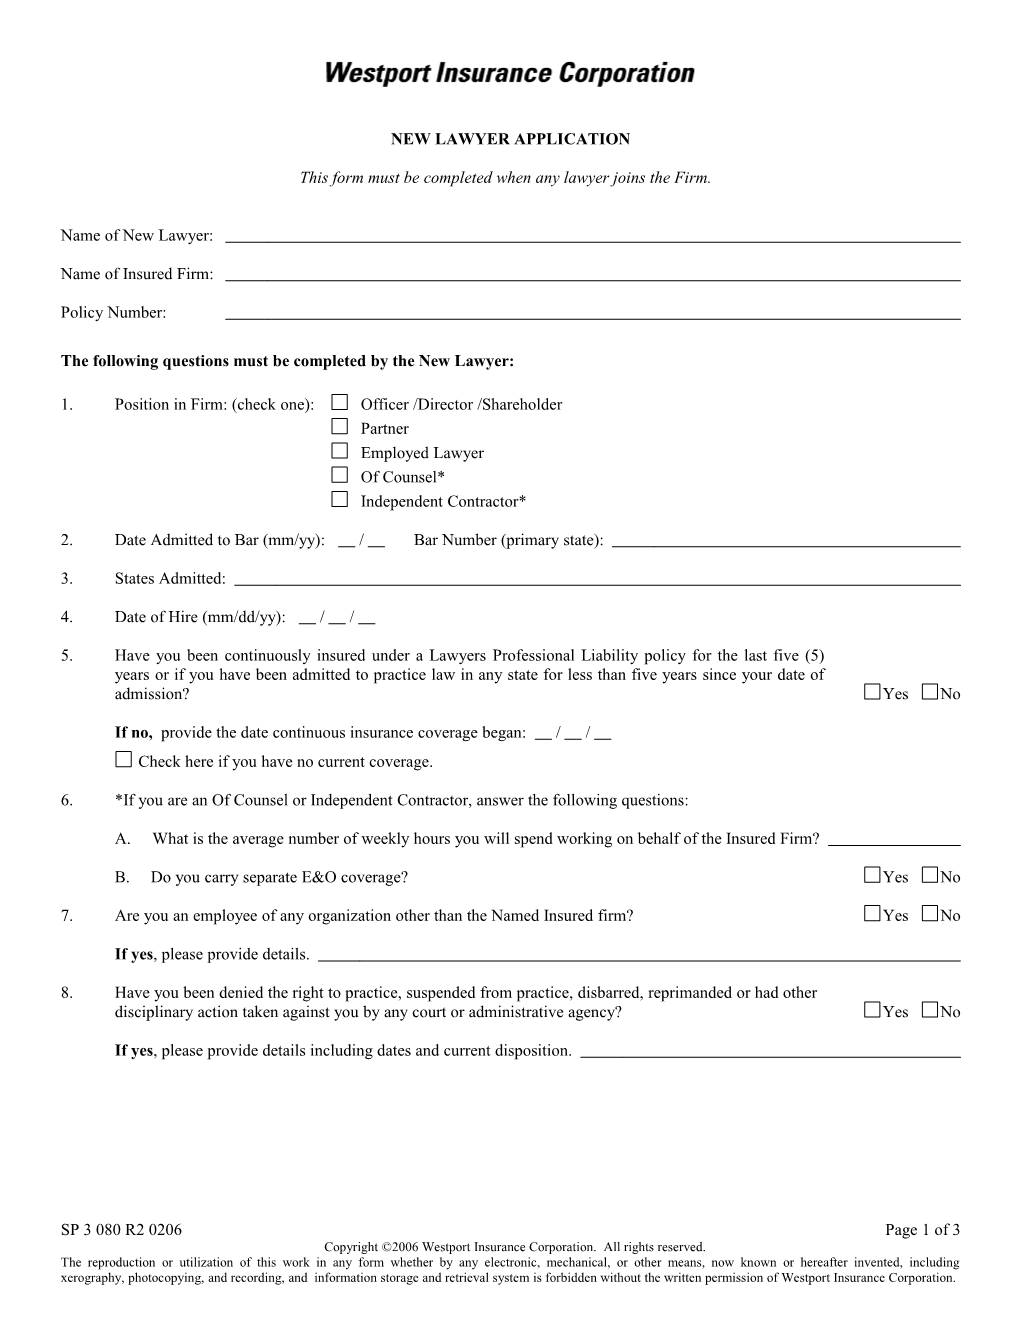 New Lawyer Application